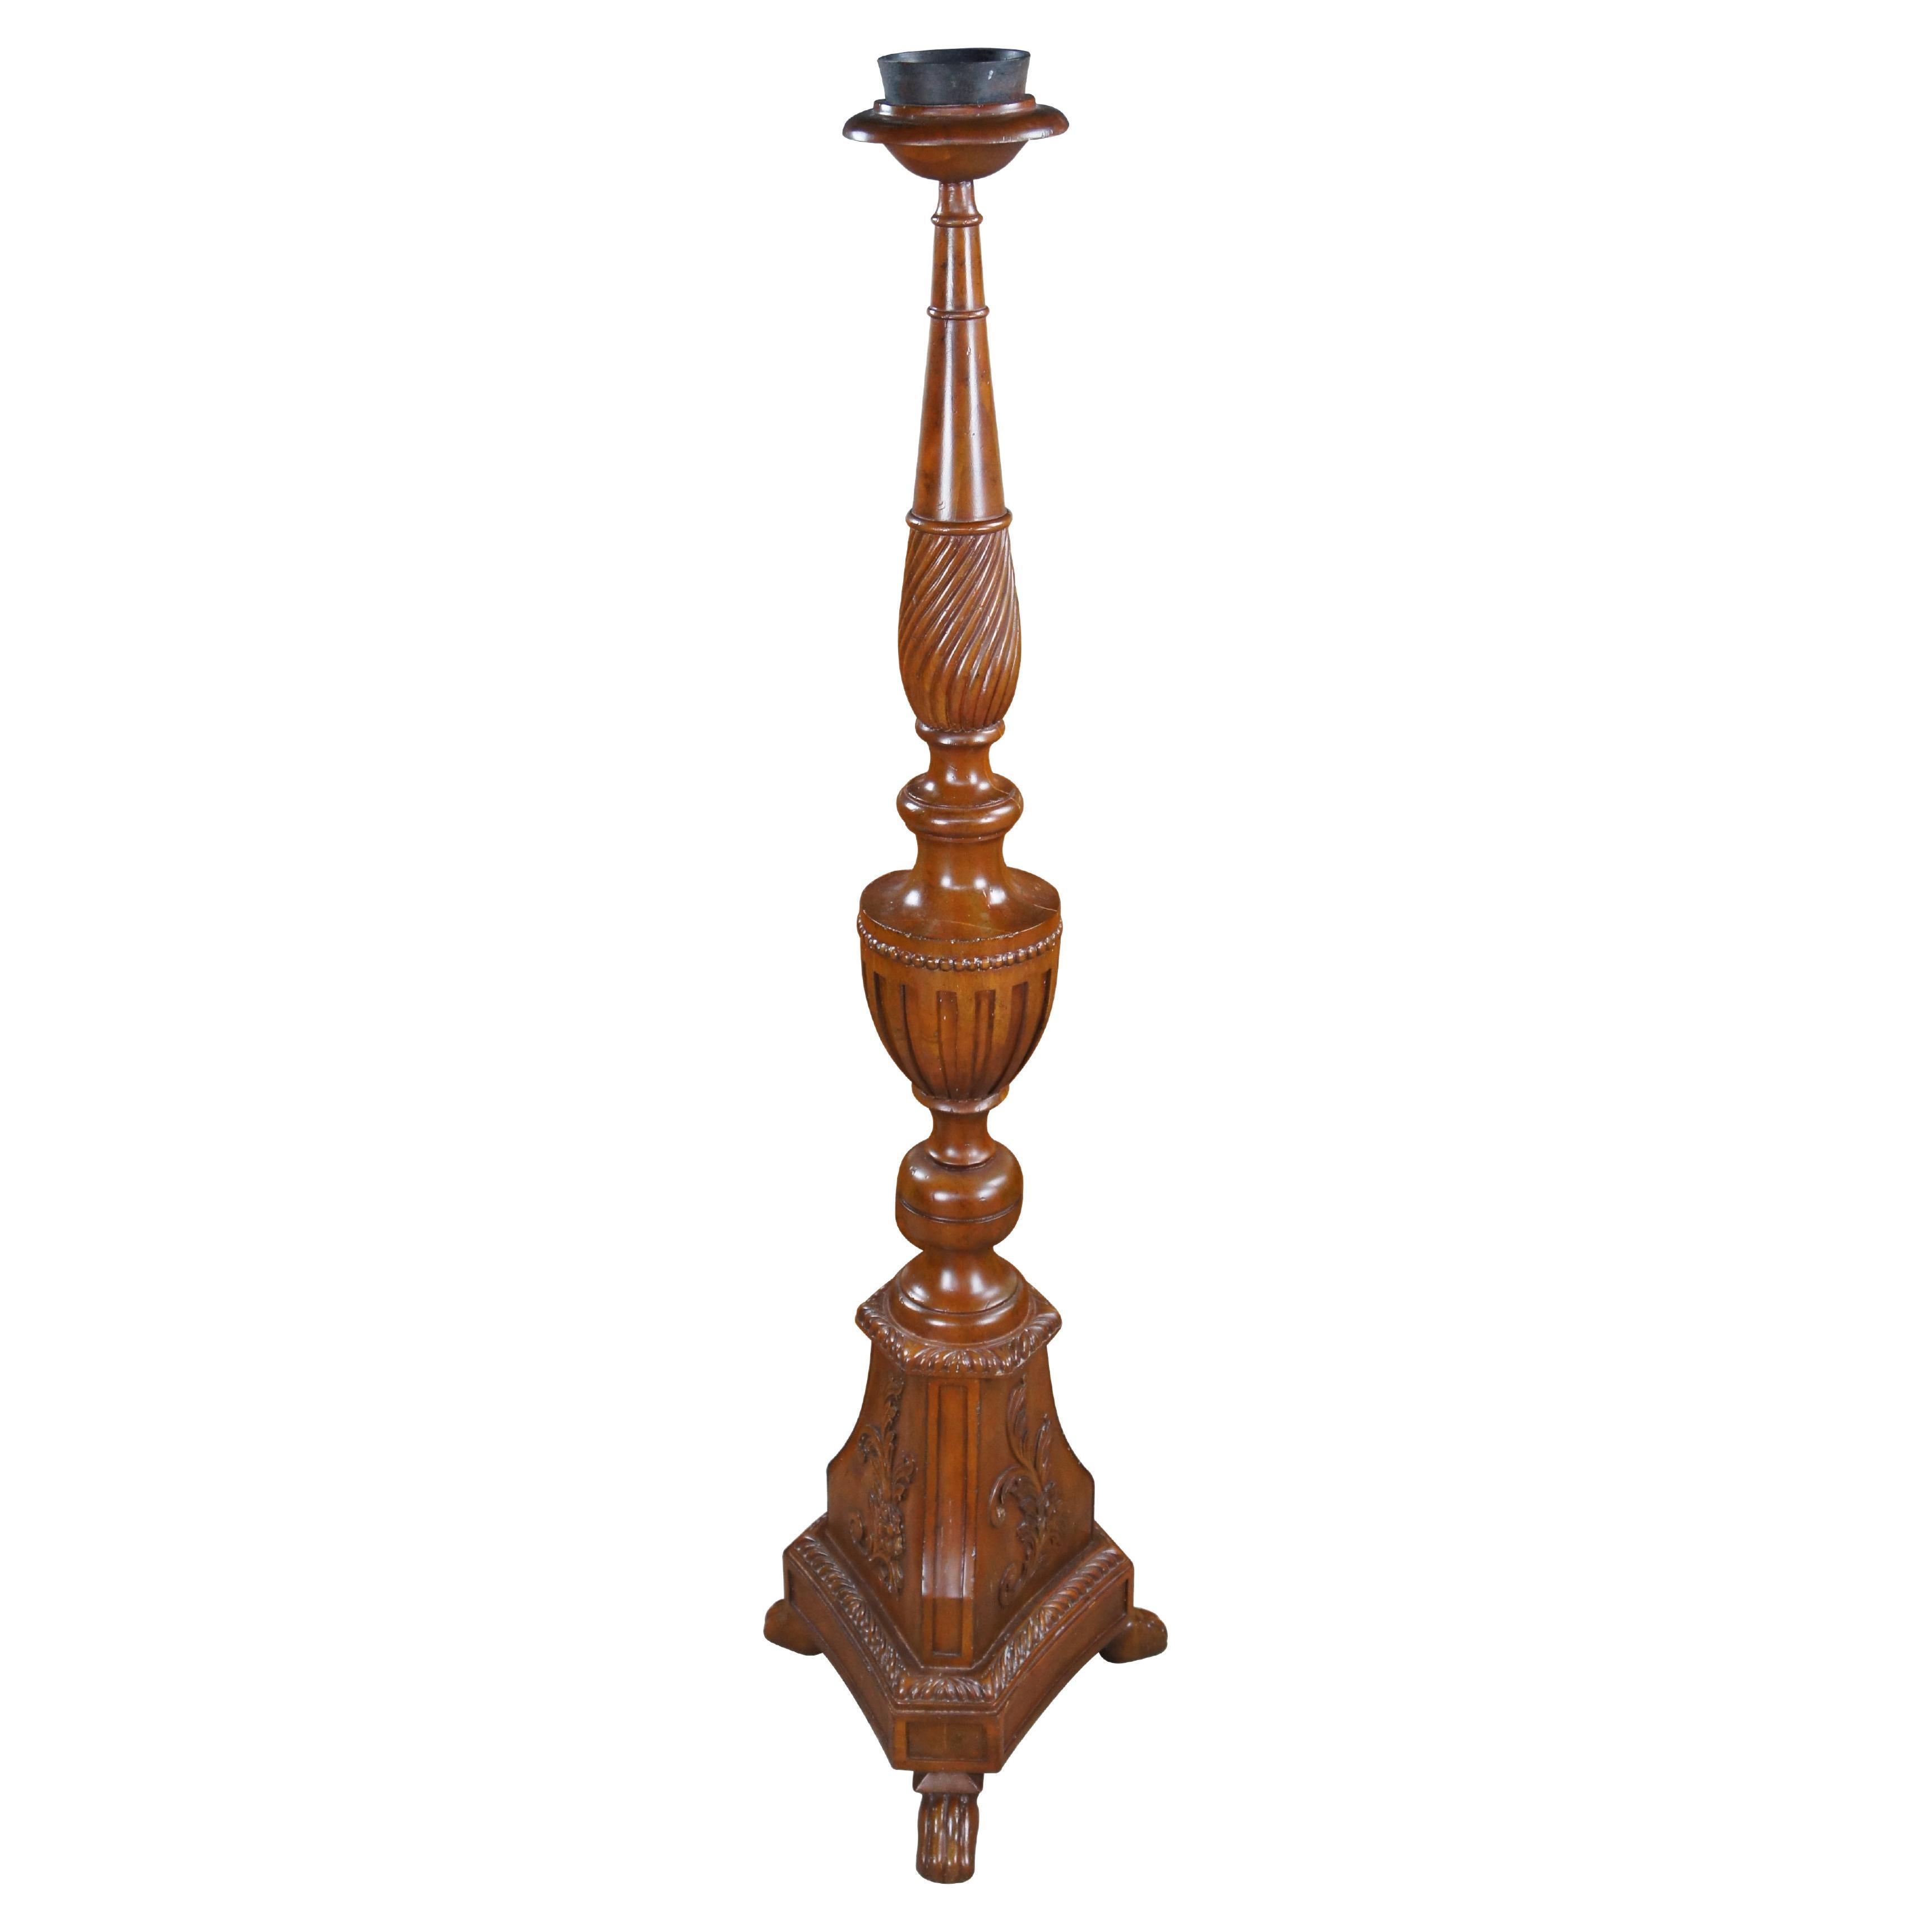 A stately pair of Theodore Alexander torchiere candle holders / altar sticks. Made from mahogany with a turned and graduated baluster with twisted, fluted and beaded accents. Features a tripod base with foliate carving over paw